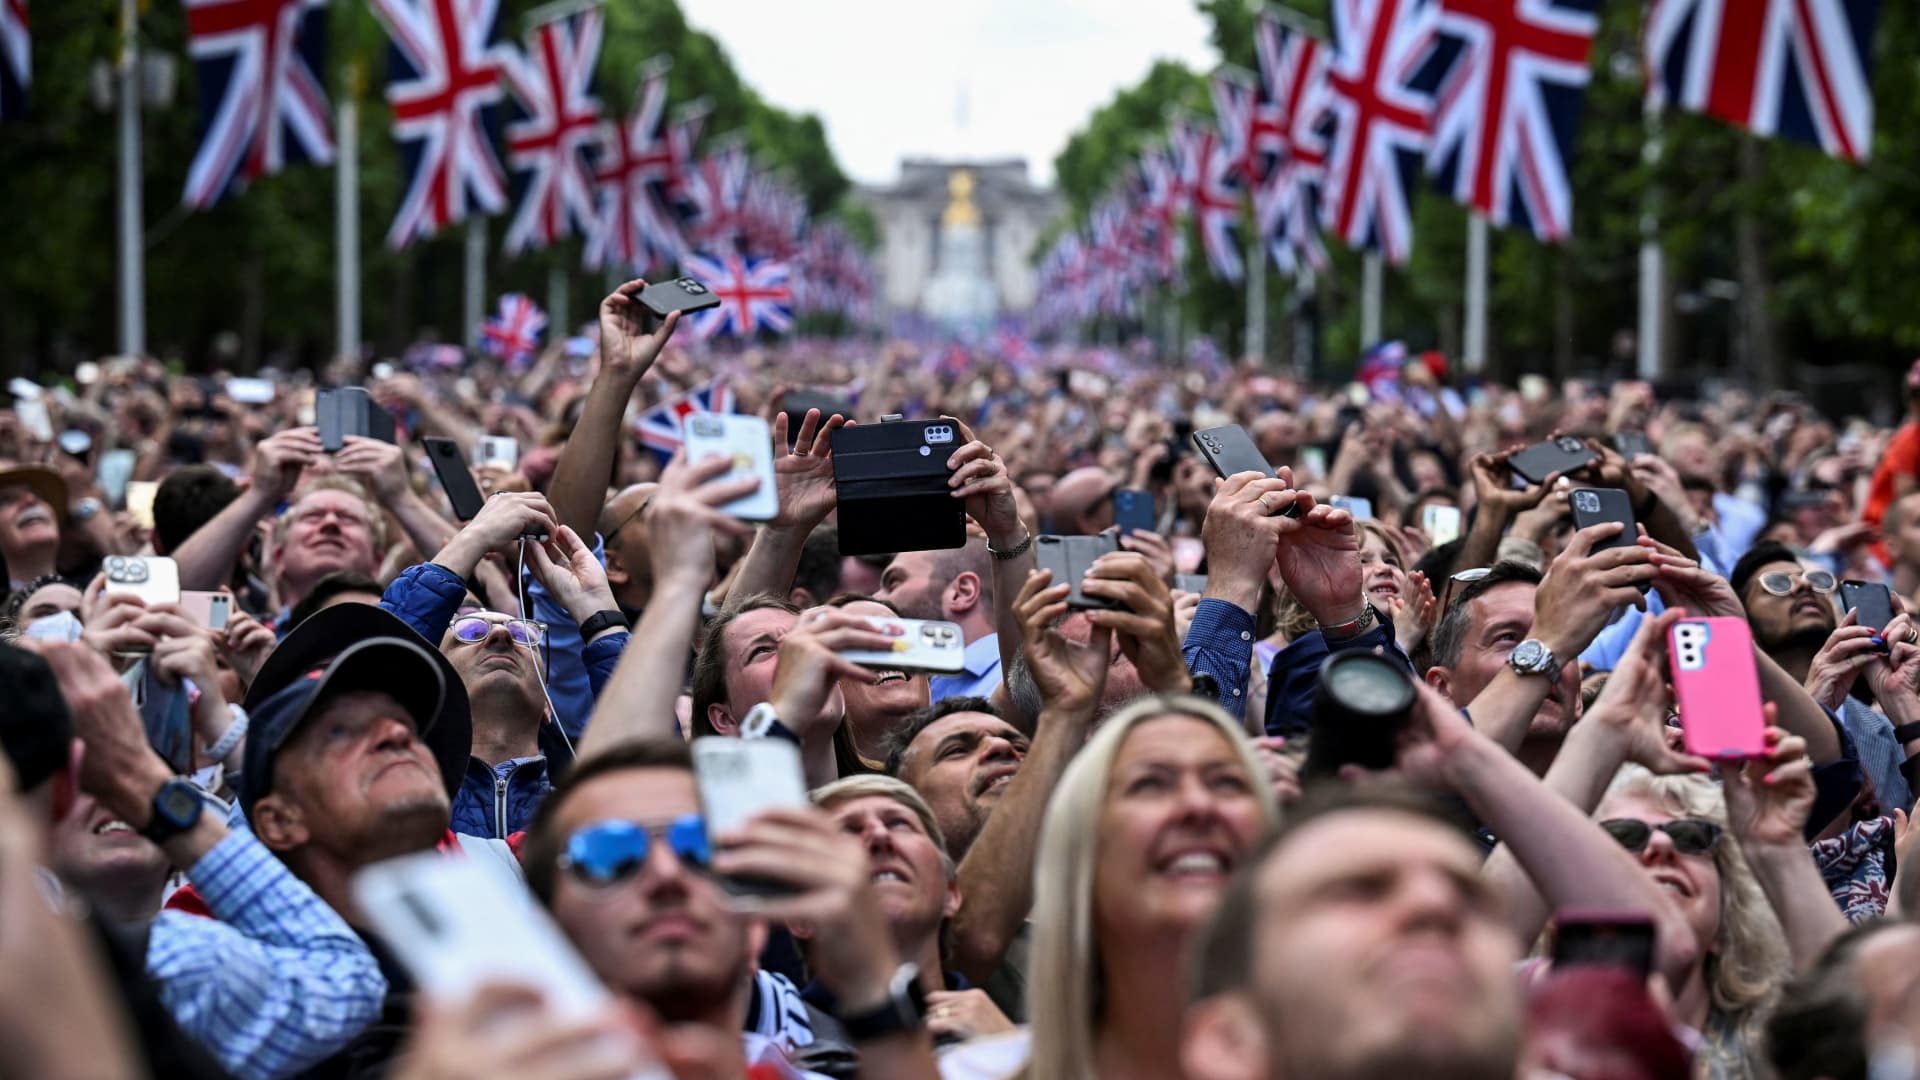 People gathered on The Mall watch a fly-past over Buckingham Palace during celebrations marking the Platinum Jubilee of Britain's Queen Elizabeth, in London, Britain, June 2, 2022. 